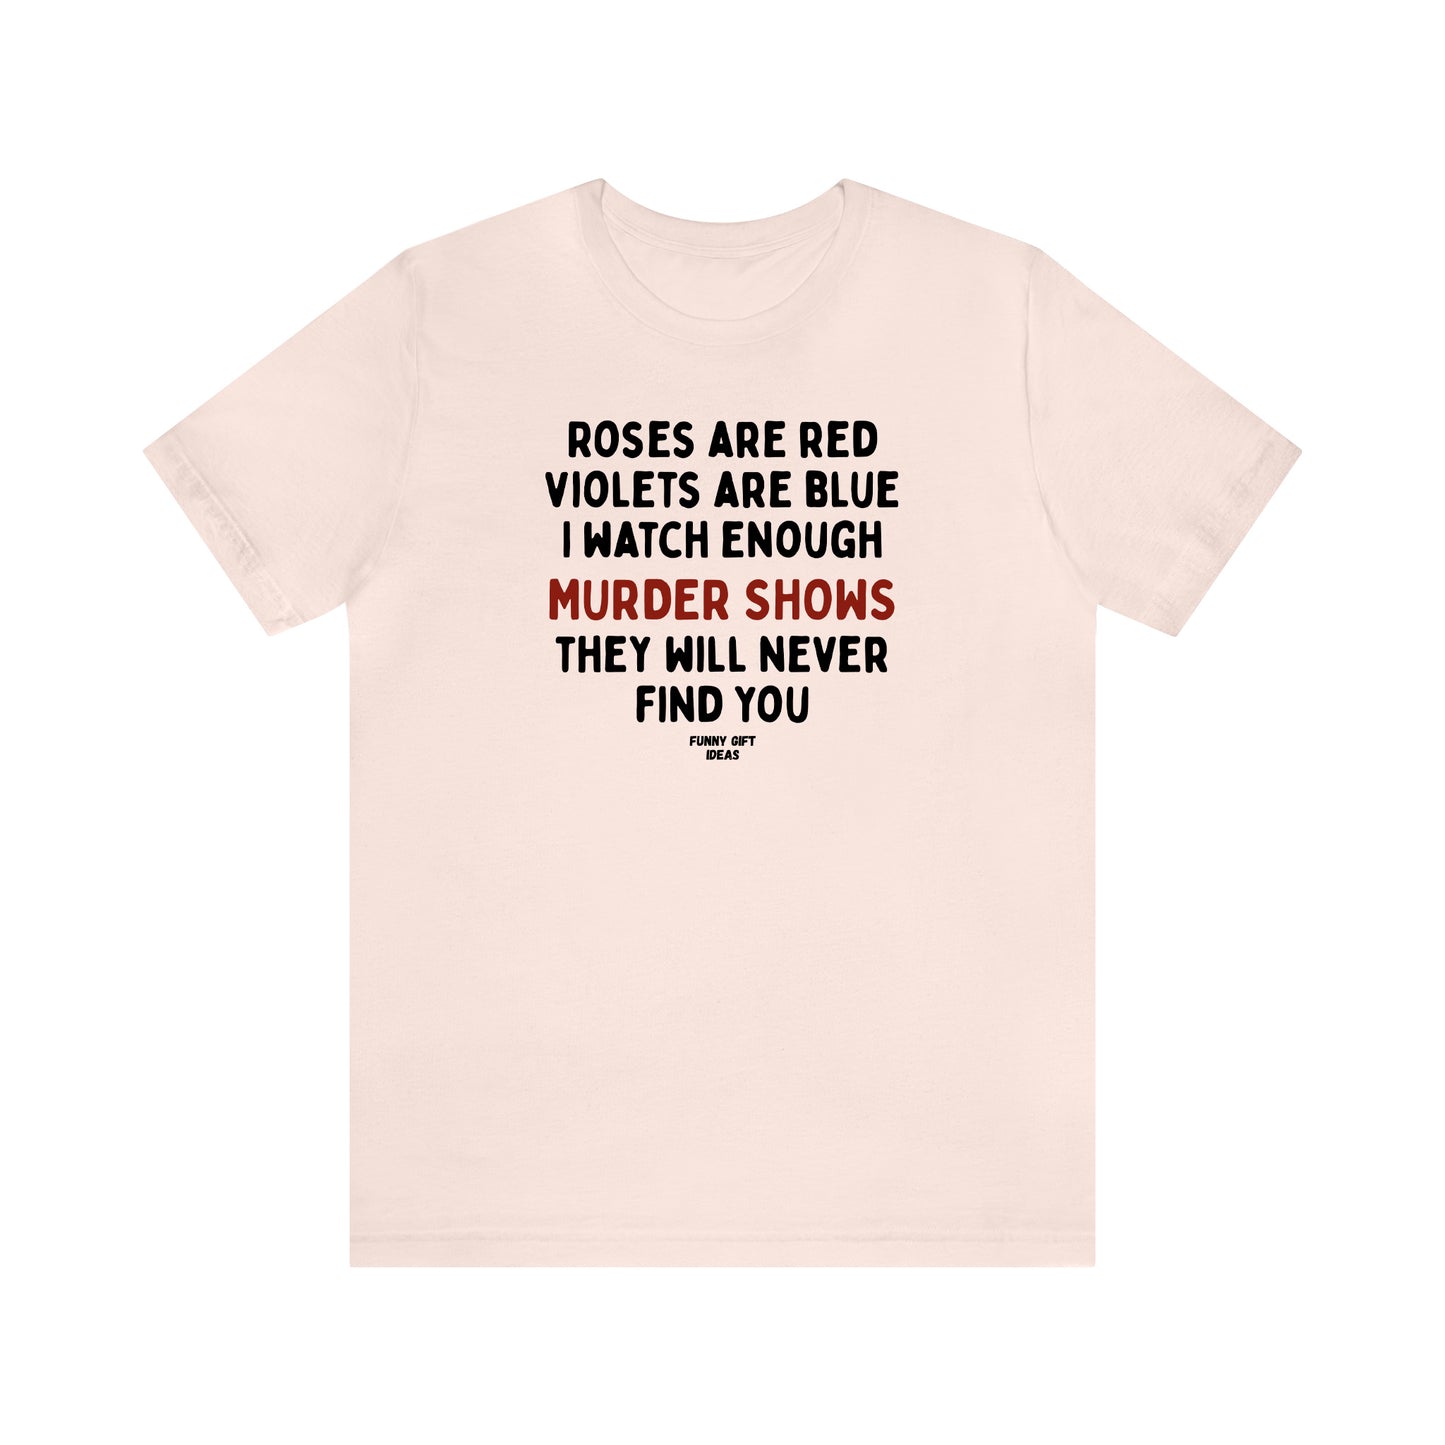 Funny Shirts for Women - Roses Are Red Violets Are Blue I Watch Enough Murder Shows They Will Never Find You - Women's T Shirts